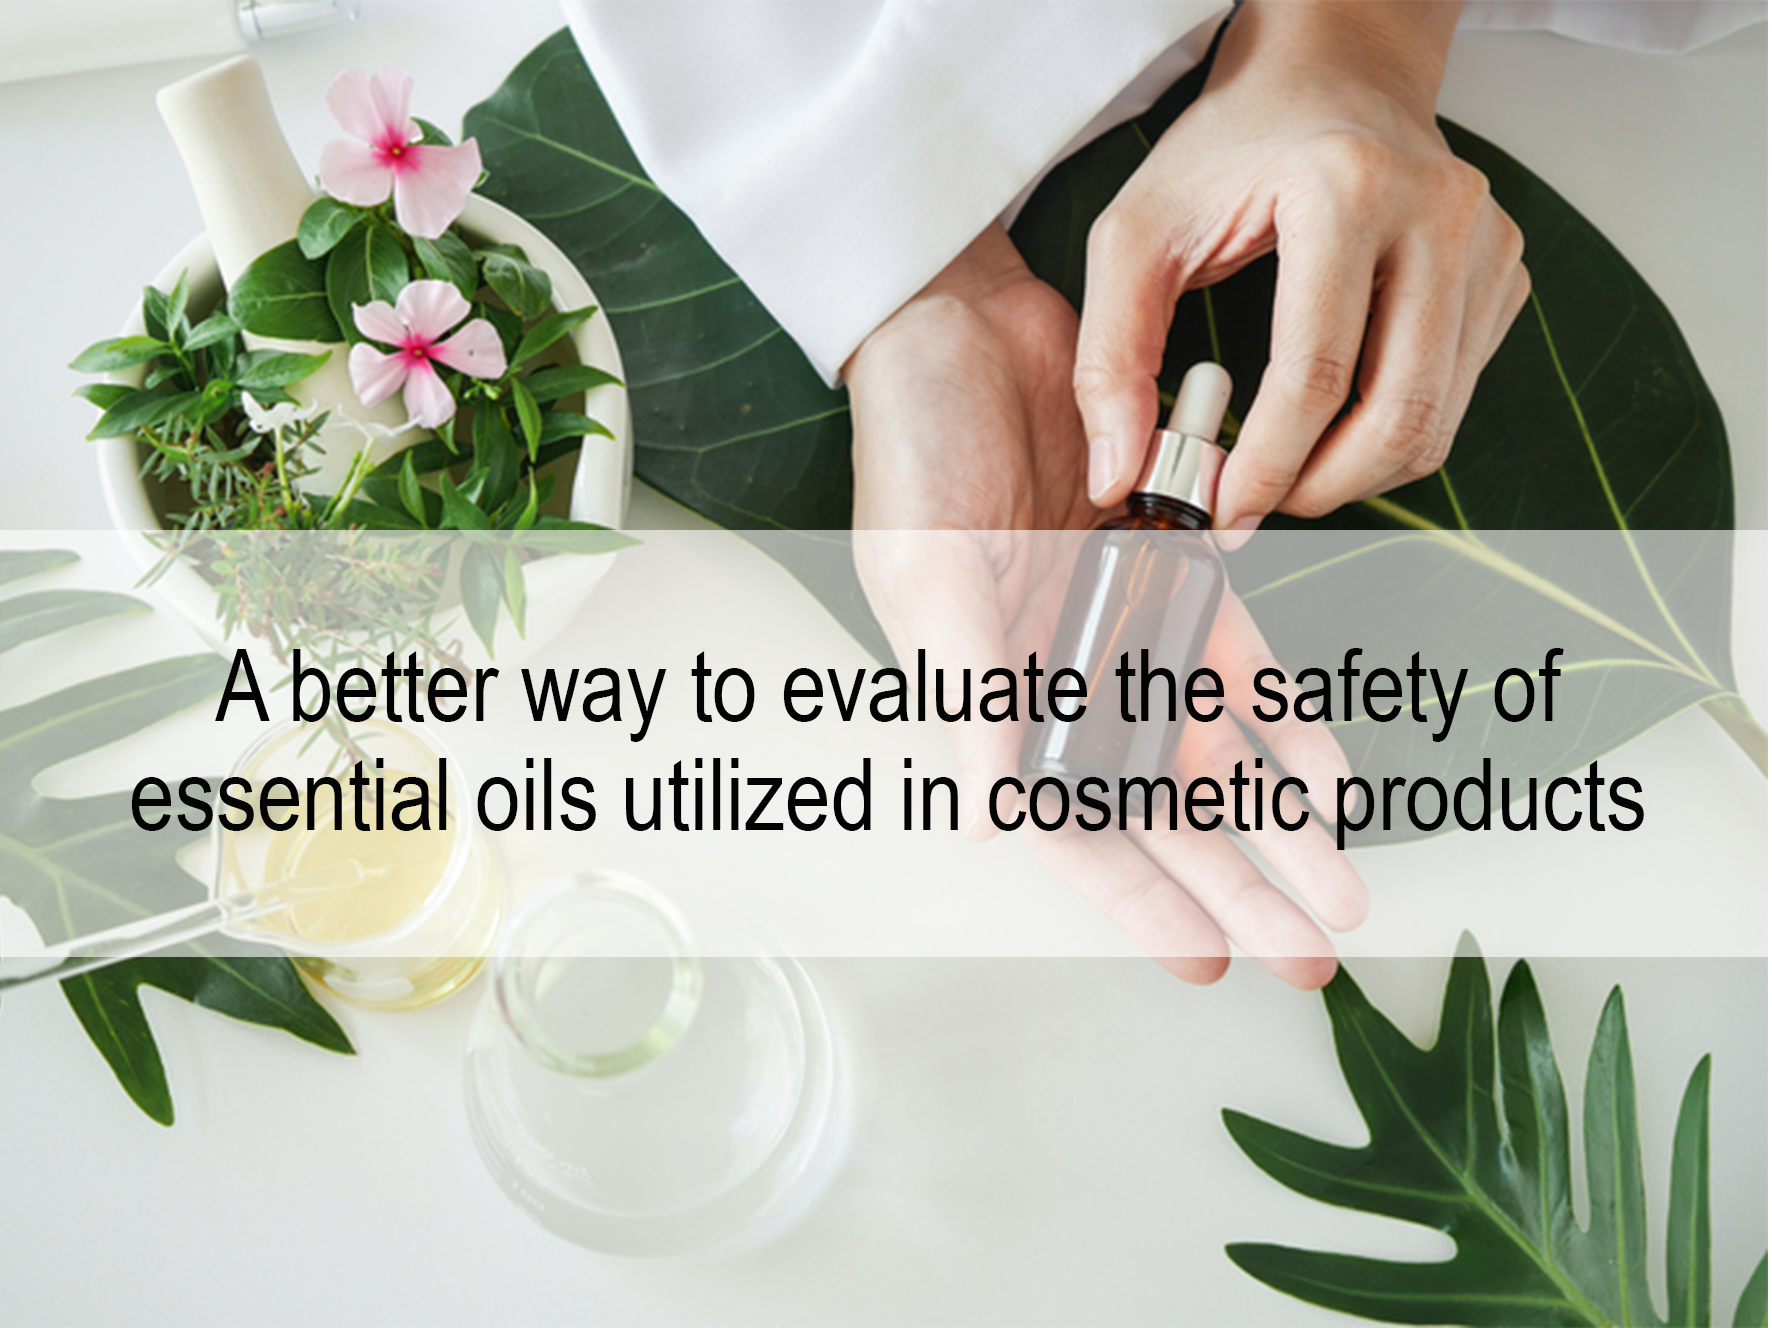 A better way to evaluate the safety of essential oils utilized in cosmetic products by Eurosafe